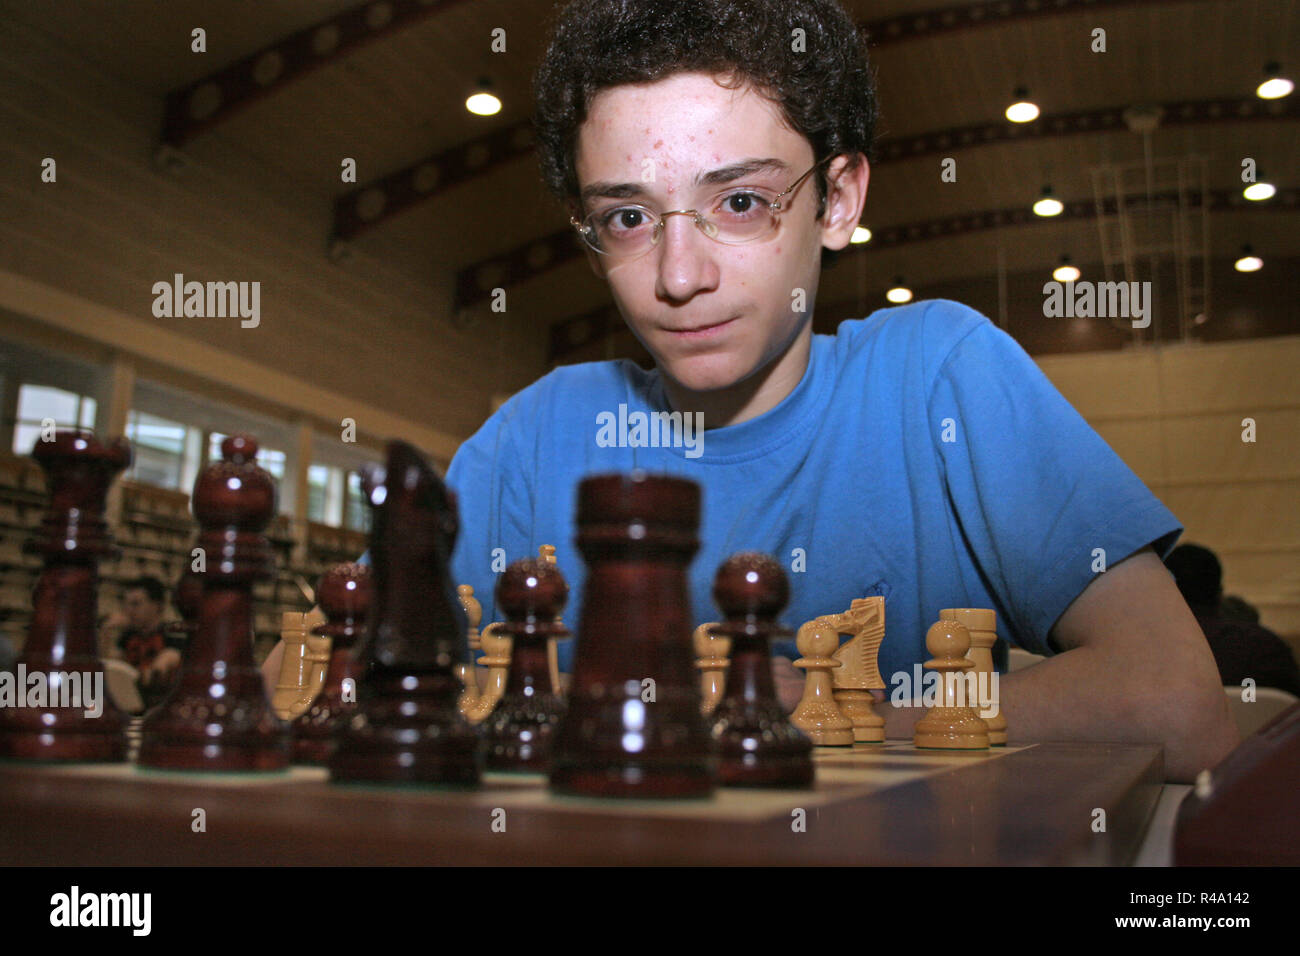 FILE PICS: Fabiano Caruana who plays in the London World Chess Championship 2018. Portrait of Fabiano Caruana taken in July 13 2006, while playing Andorra Chess Open 2006 (Andorra la Vella, Andorra). Born July 30 1992, he was 13 years, 11 months and 13 days old. One year later (at the age of 14 years, 11 months and 20 days), he became the youngest grandmaster in the history of both Italy and the United States at the time. Credit: Joan Pla Vivoles/Alamy Live News Stock Photo